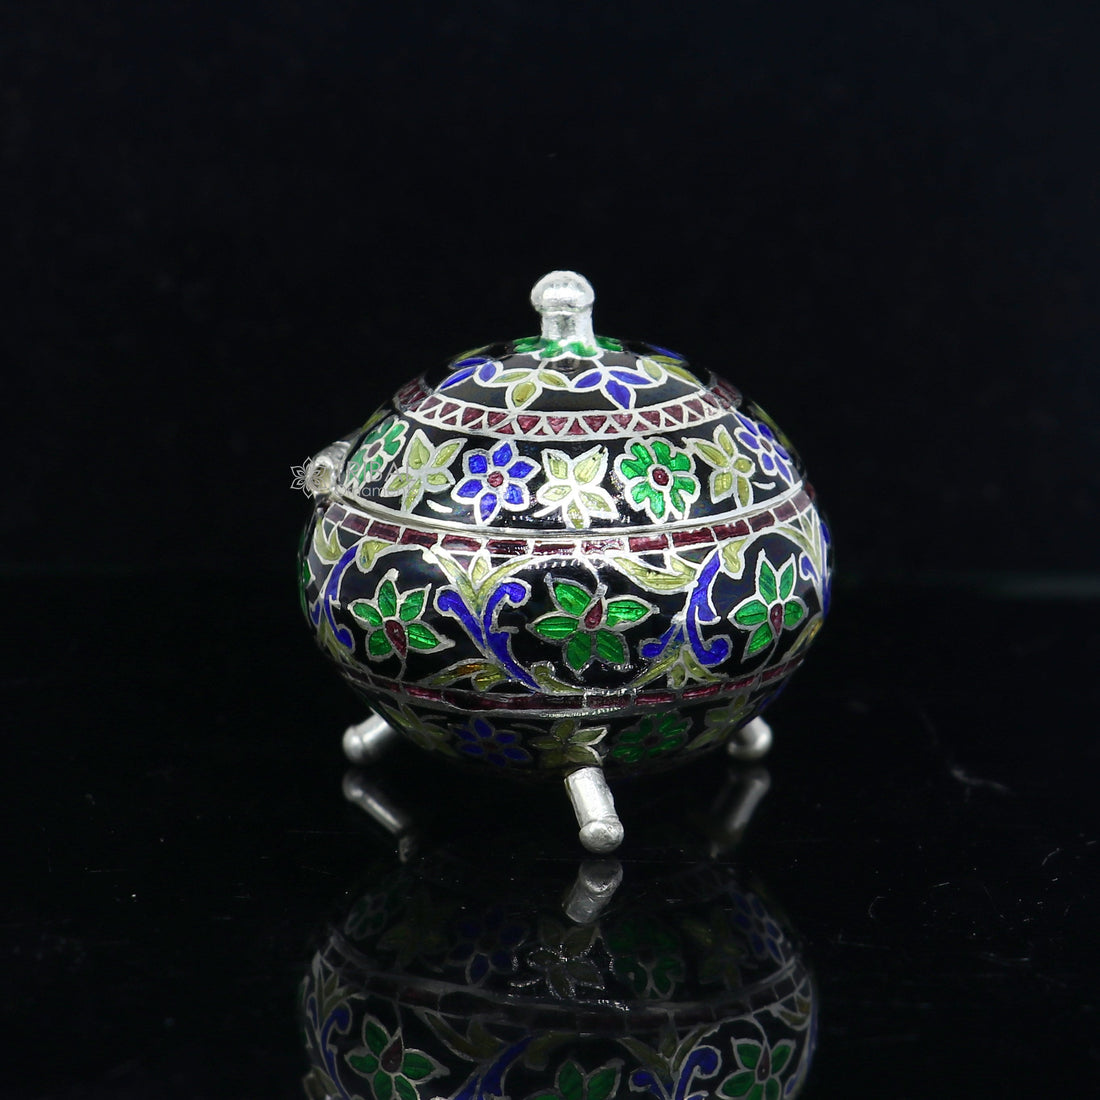 925 Sterling silver handmade fabulous trinket box, Silver container box, casket box, sindoor box, enamel work customized gifting box stb835 - TRIBAL ORNAMENTS